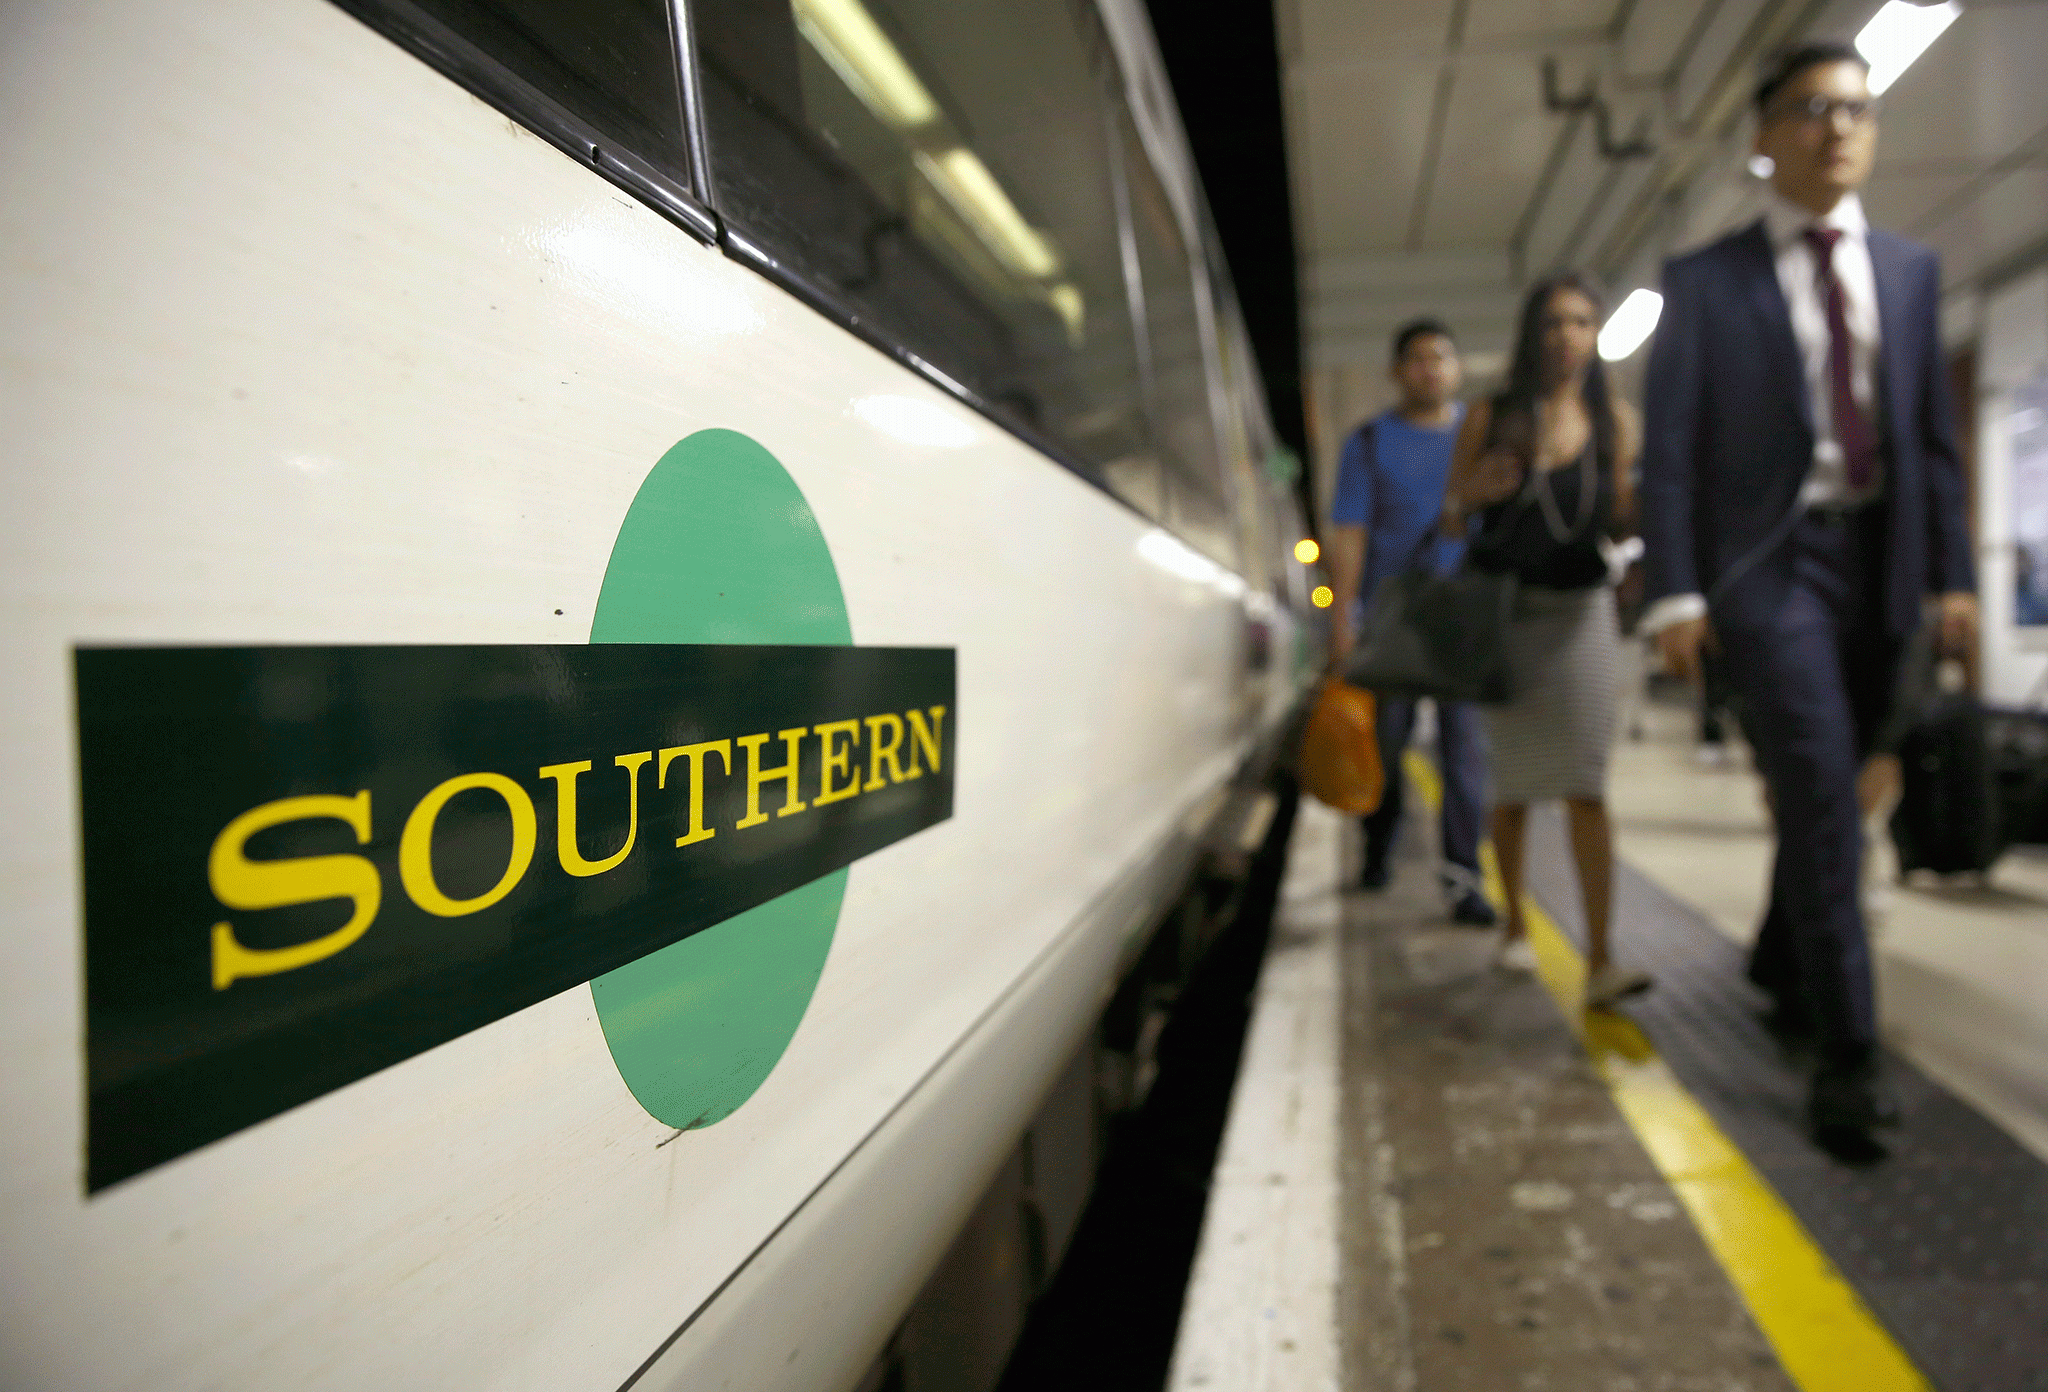 Southern Rail strike: Fraction of profits ‘hoarded’ by company could end dispute, RMT union boss says